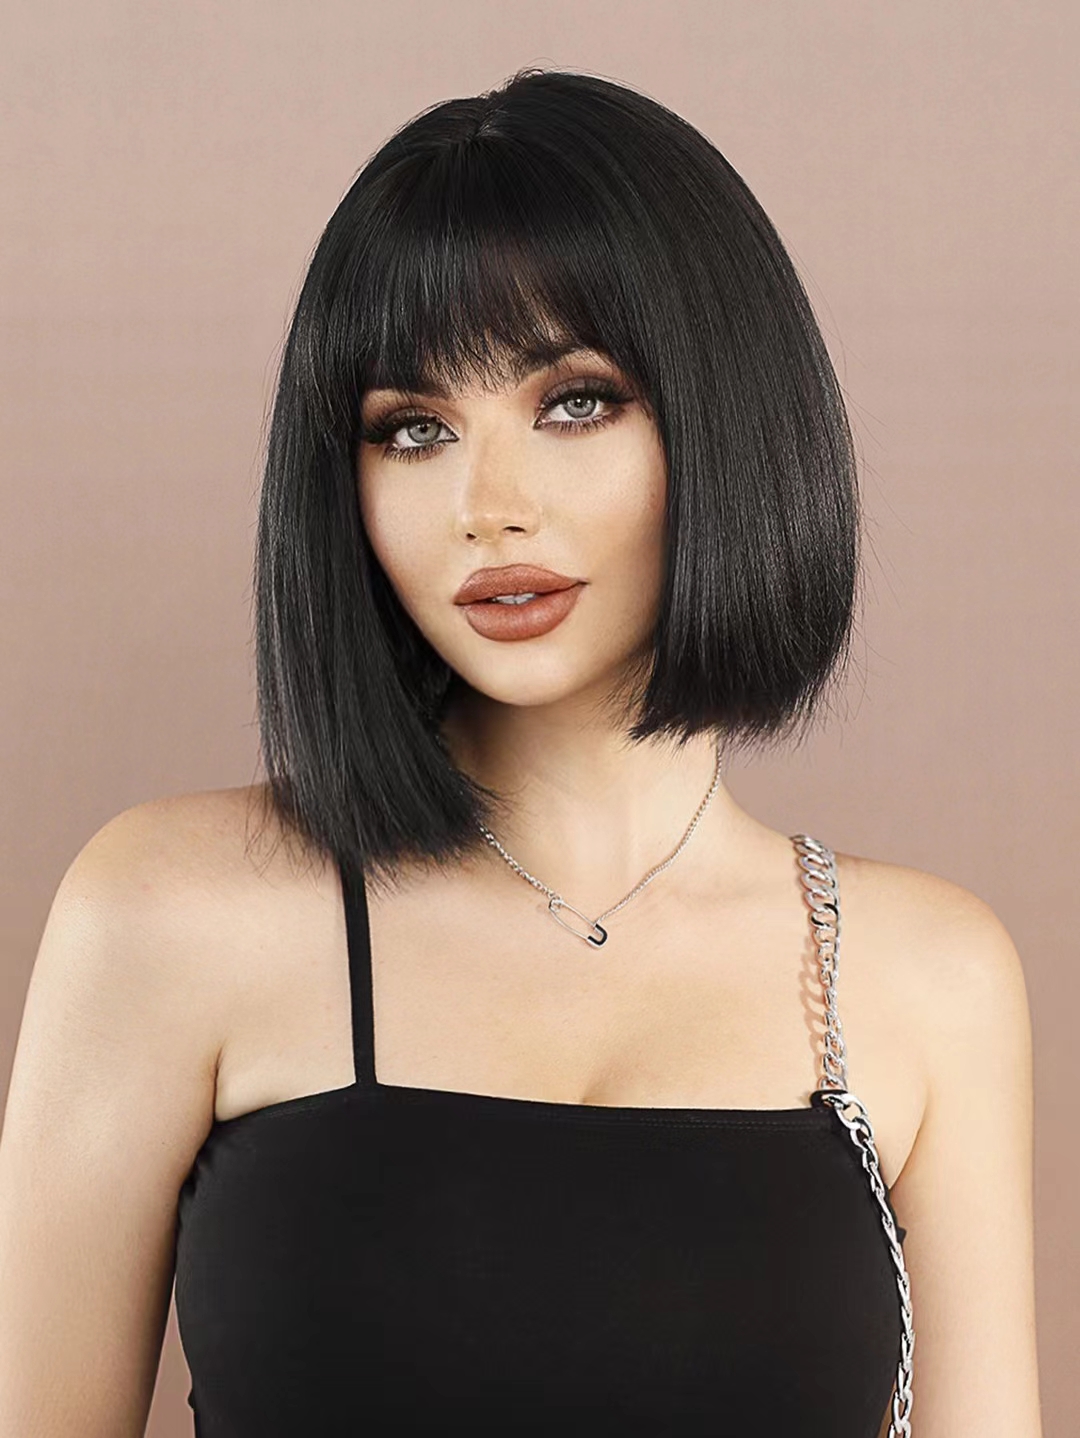 Ready-to-go synthetic wig in YAKI black bob style, featuring short straight hair with bangs